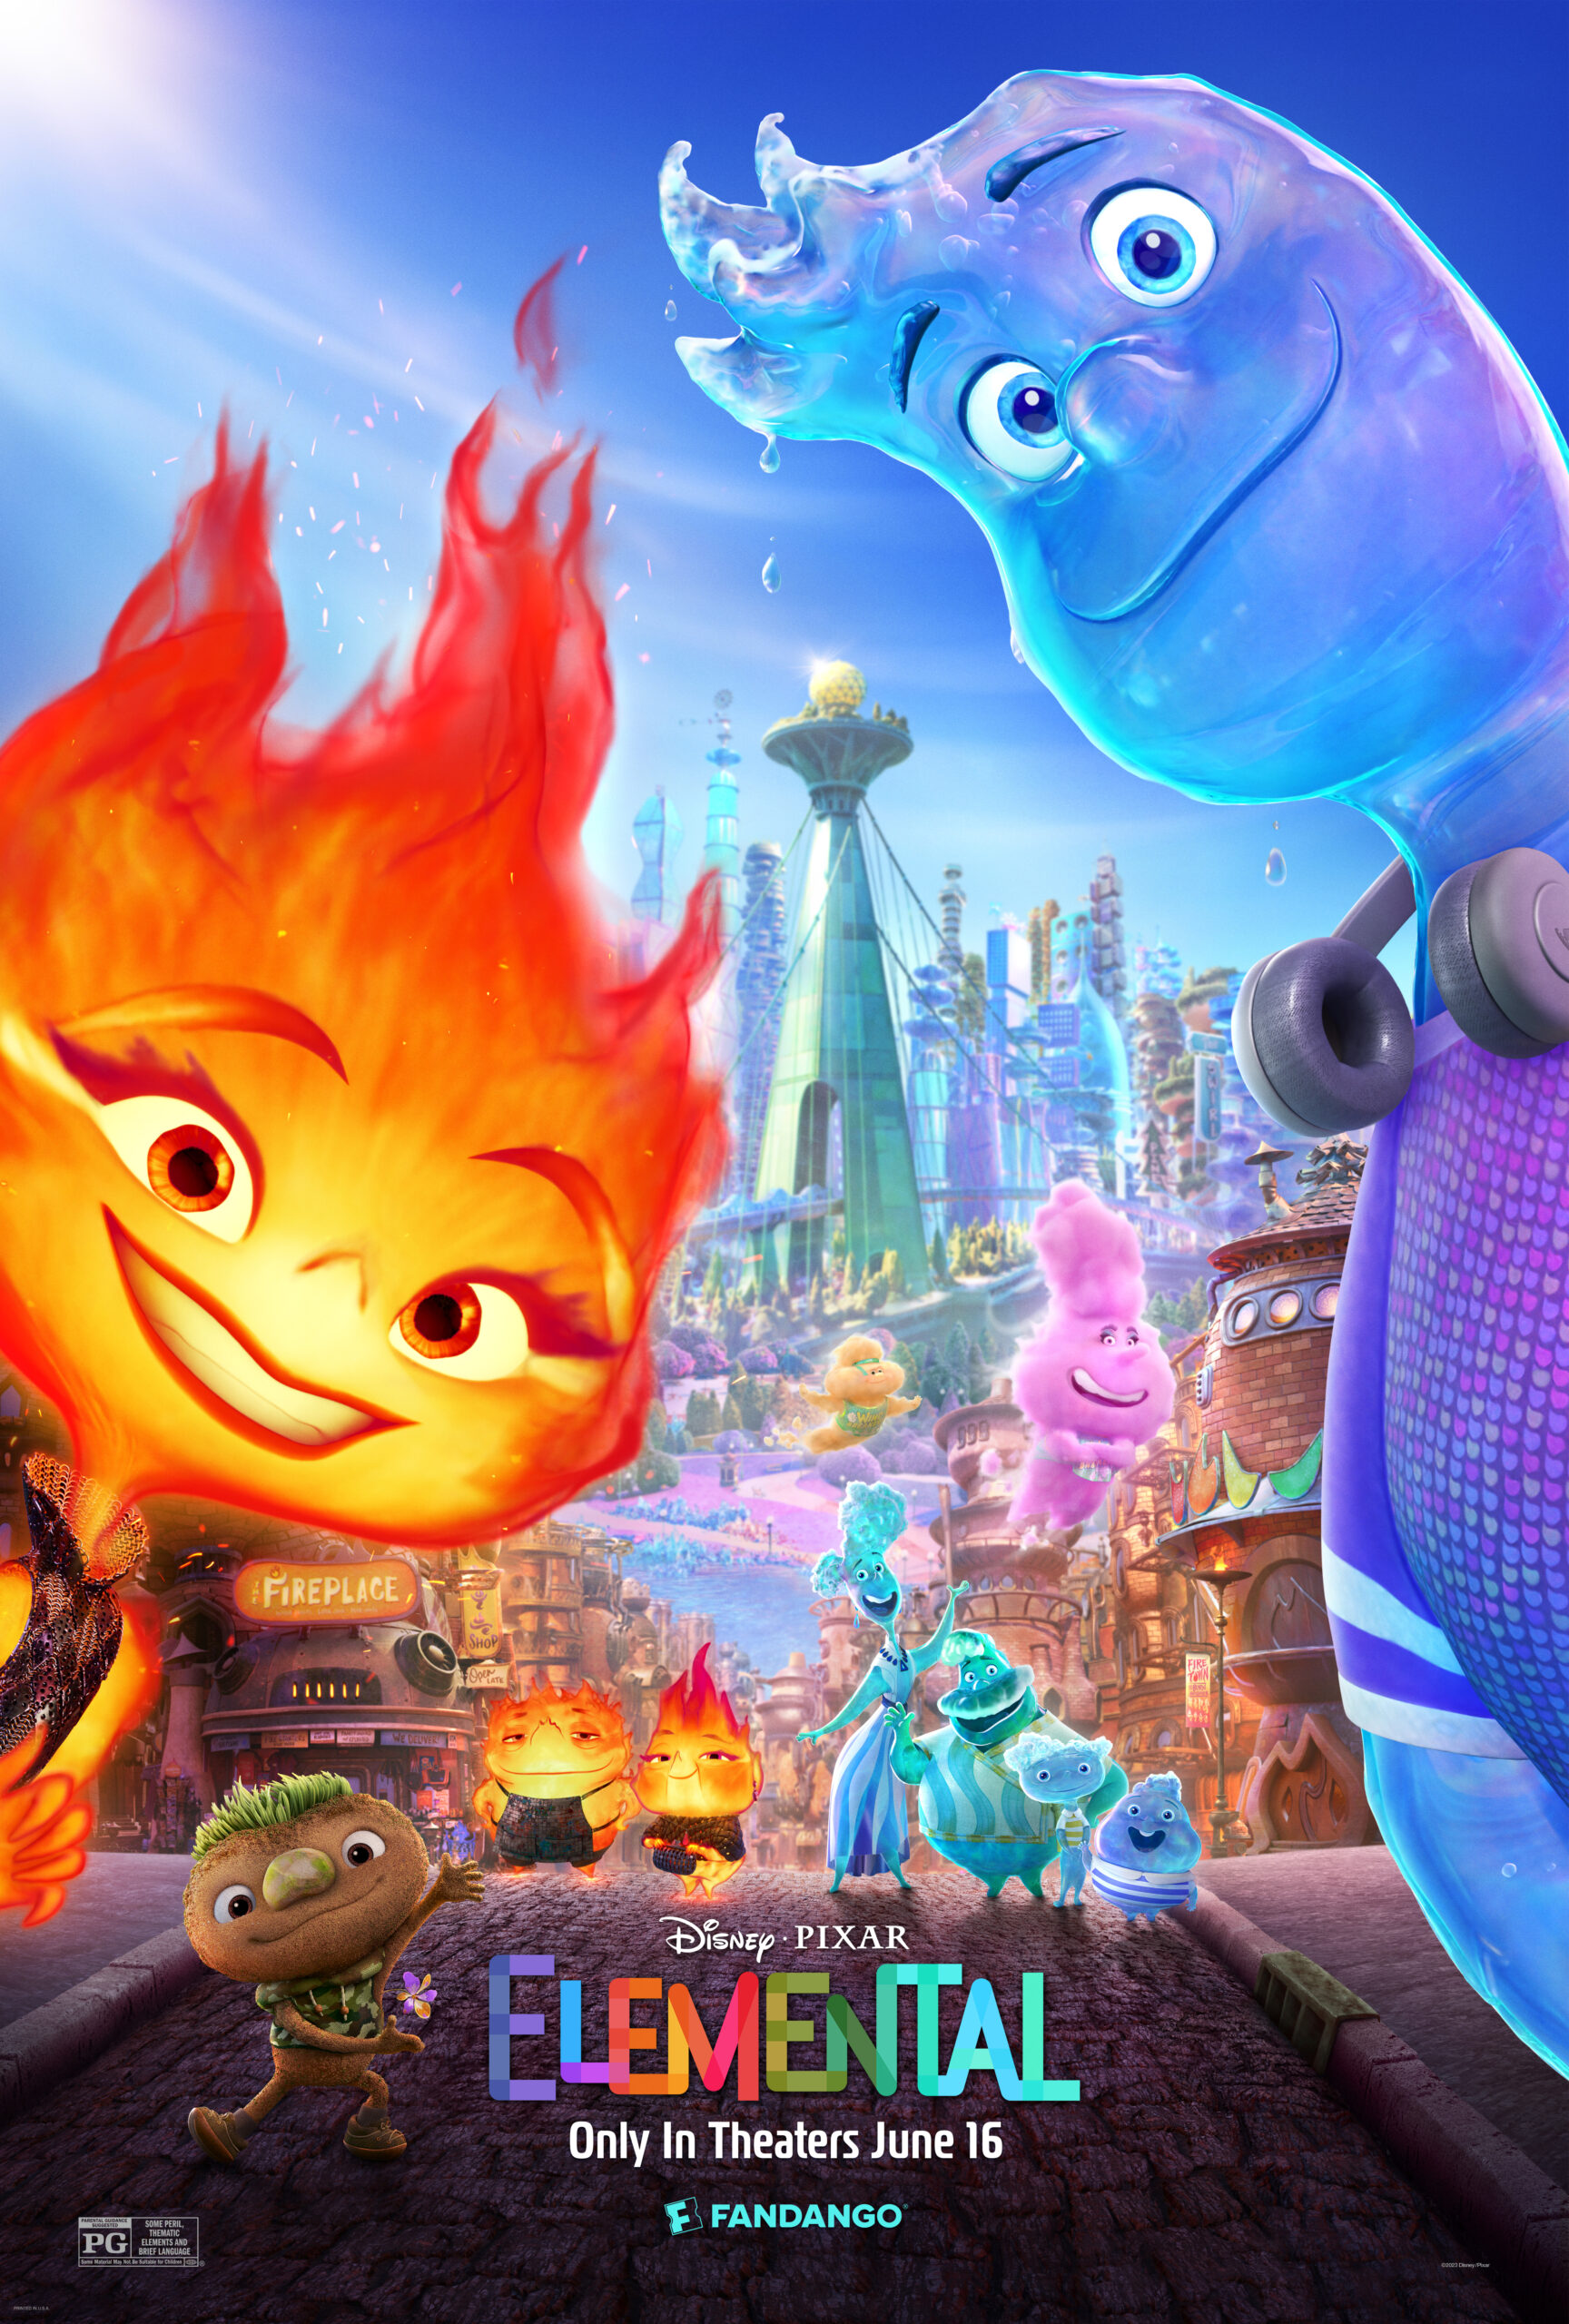 New Movie Posters Revealed For Pixar’s Elemental